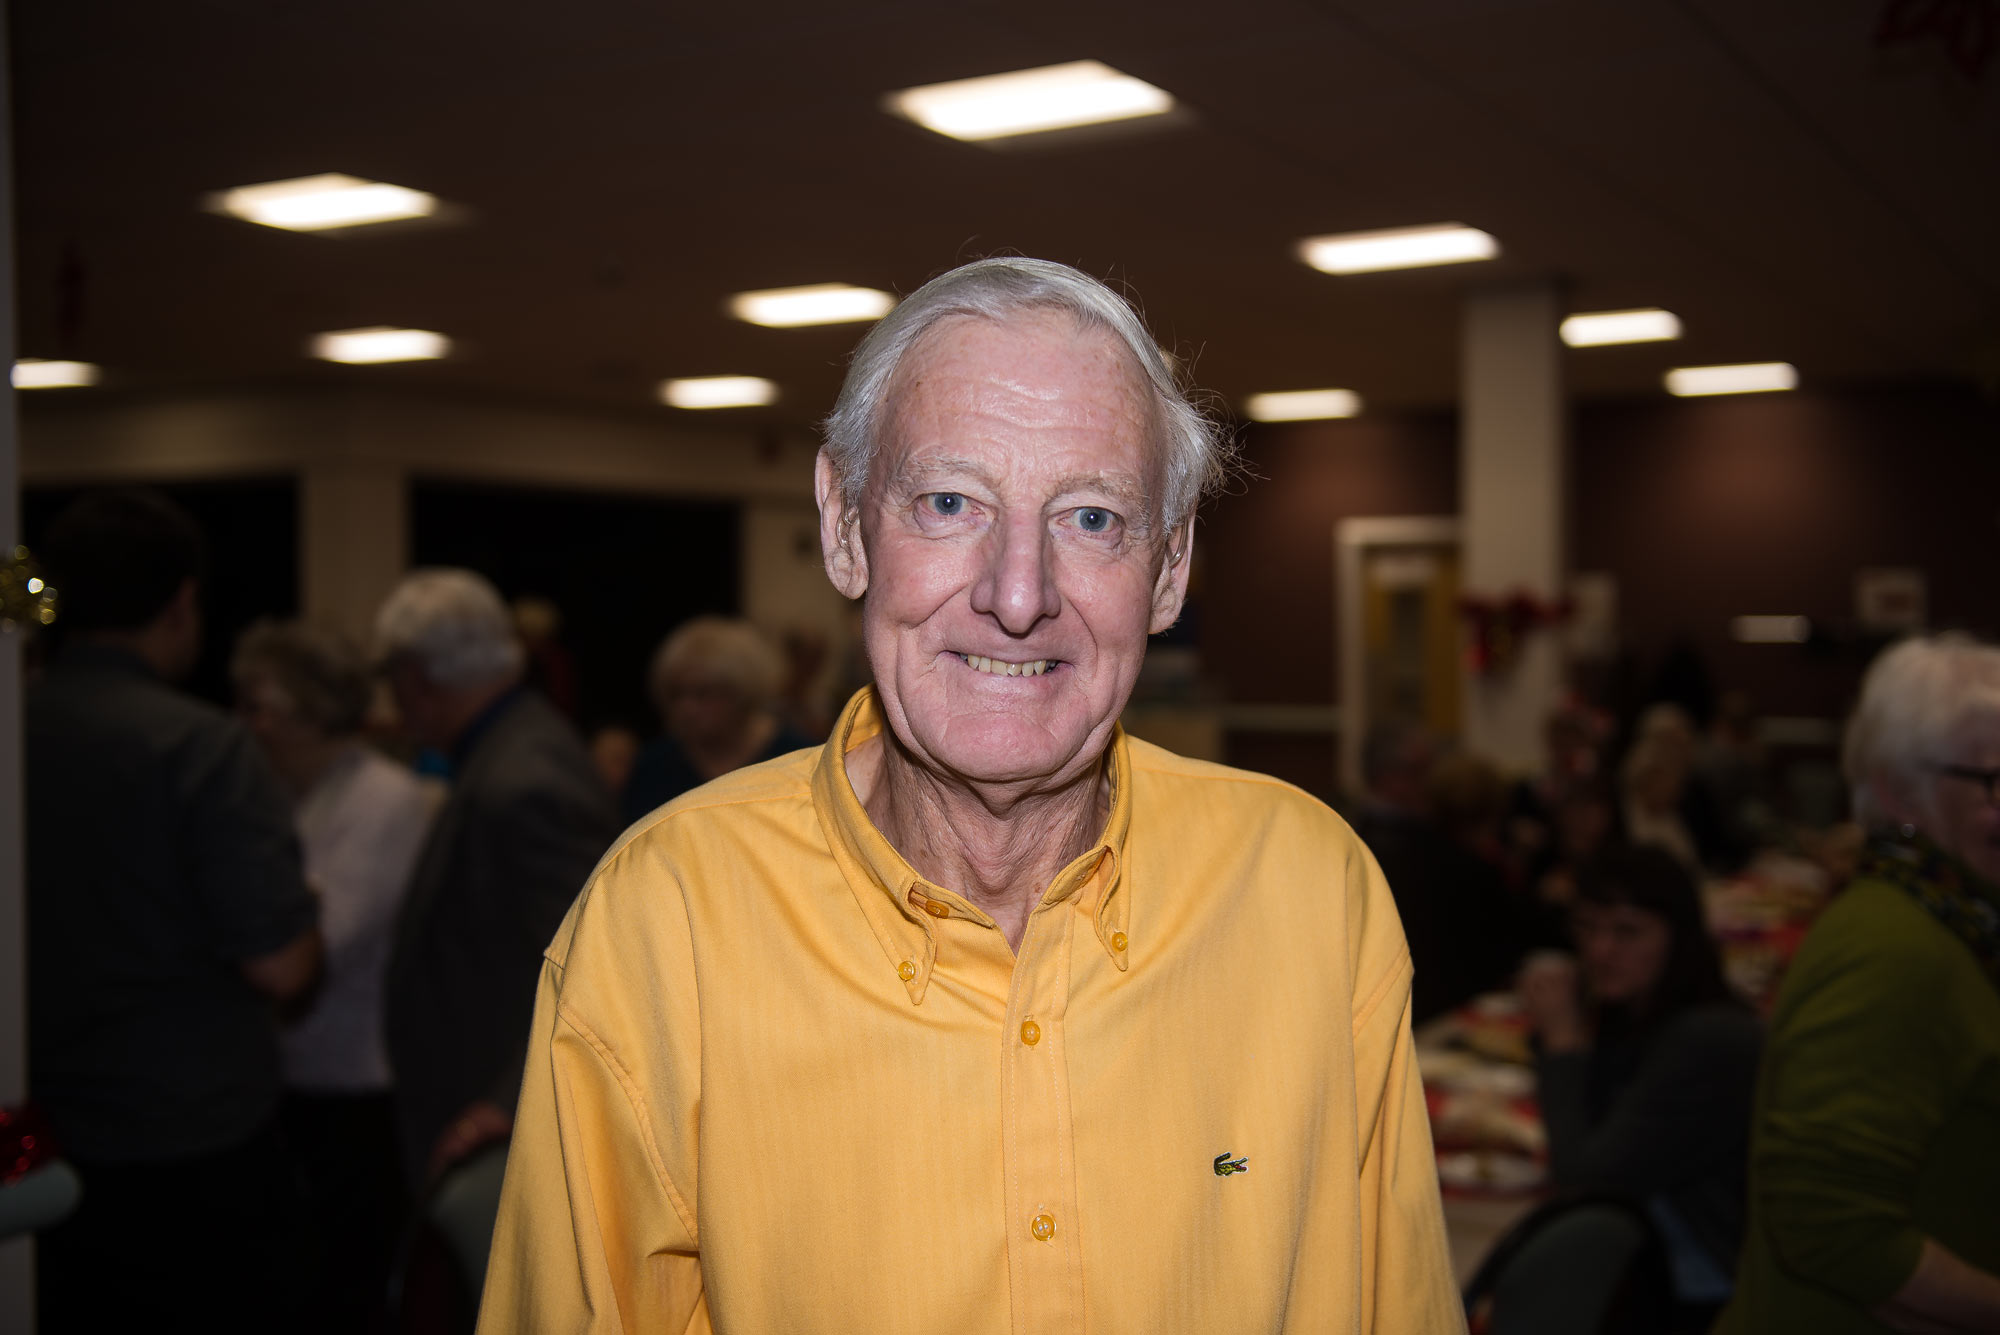 Peter Kershaw has given 40 years of volunteering to the Trust